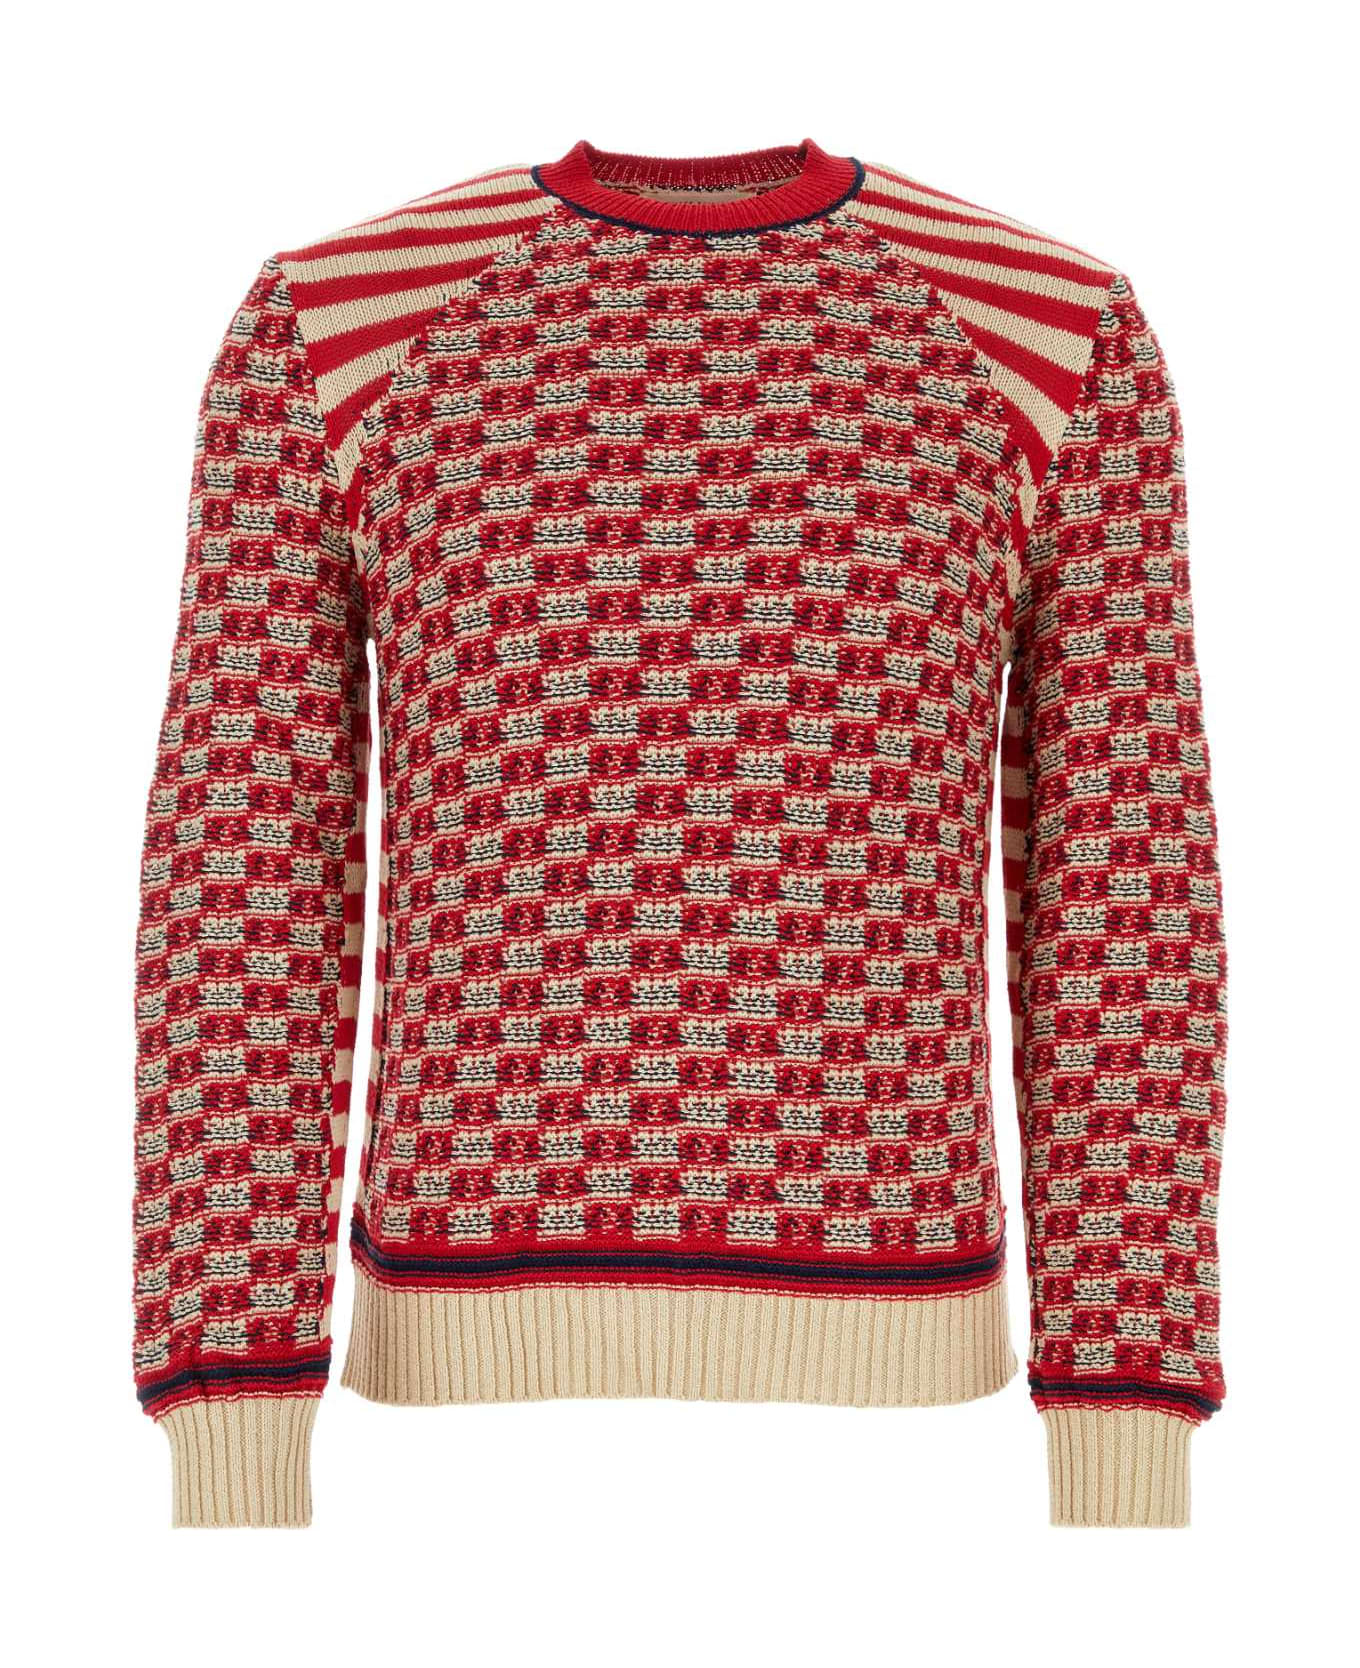 Wales Bonner Embroidered Cotton Unity Sweater - REDIVORY